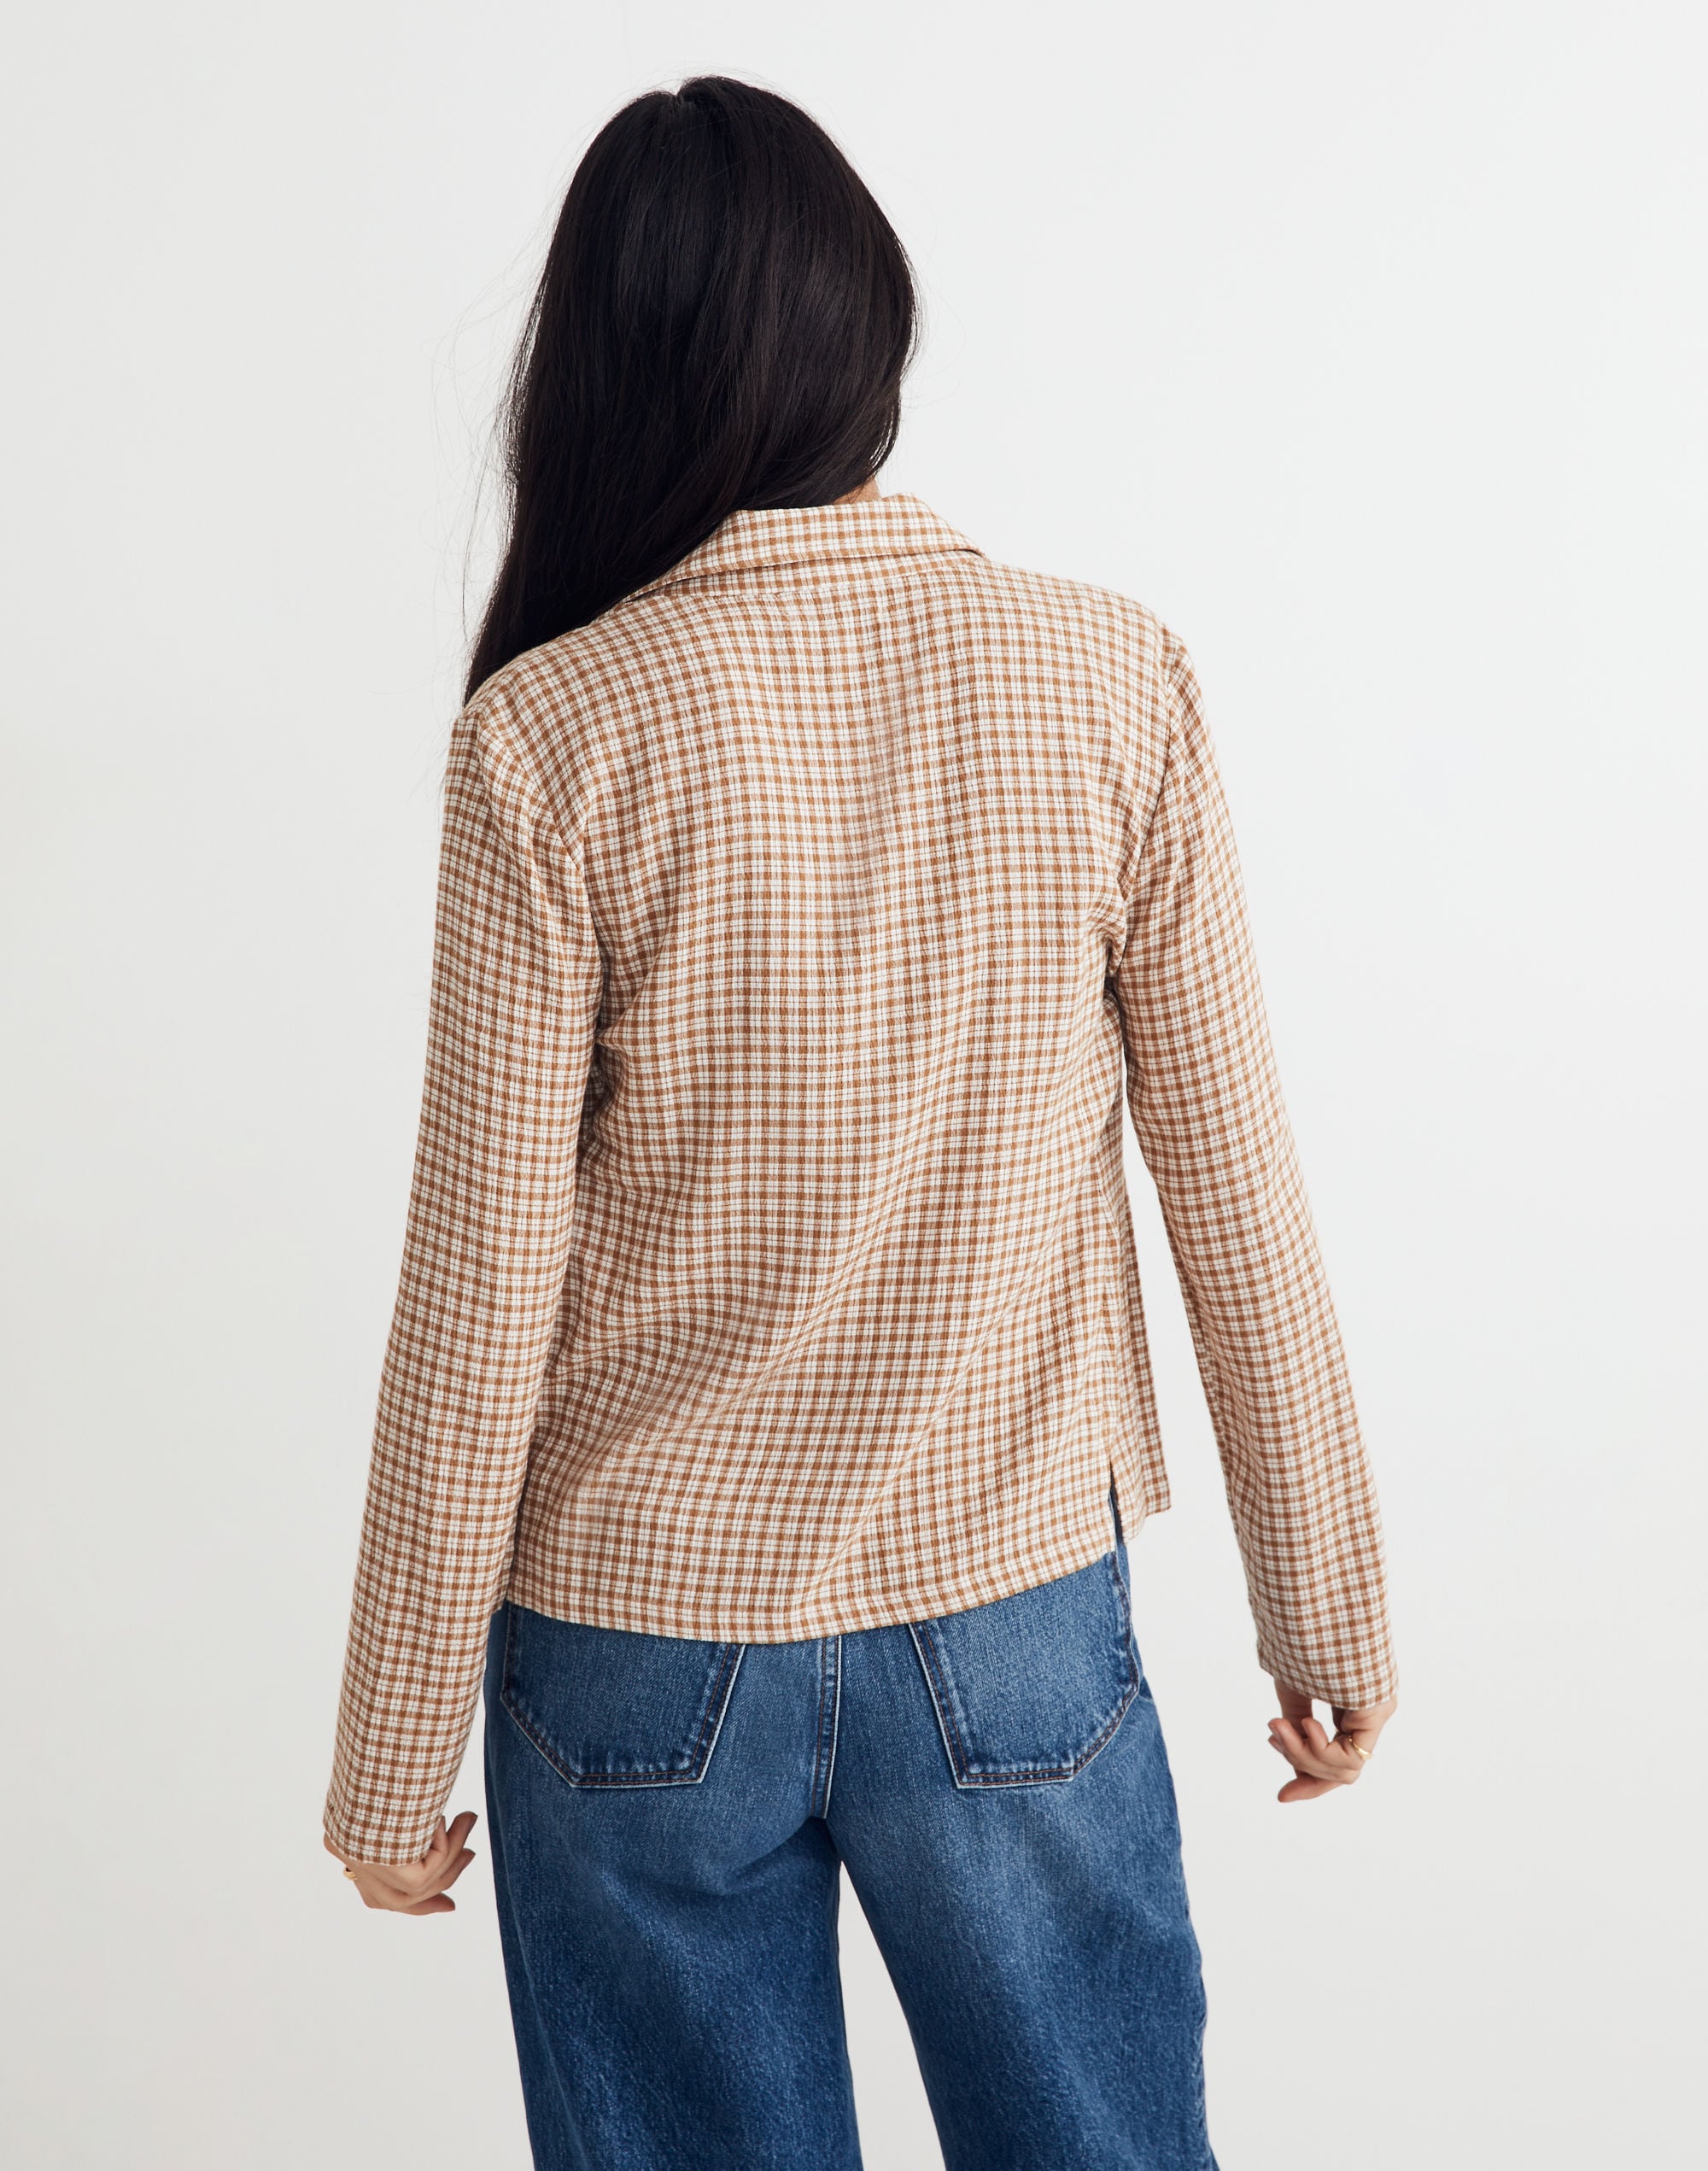 Crinkle Slim Button-Up Shirt in Plaid